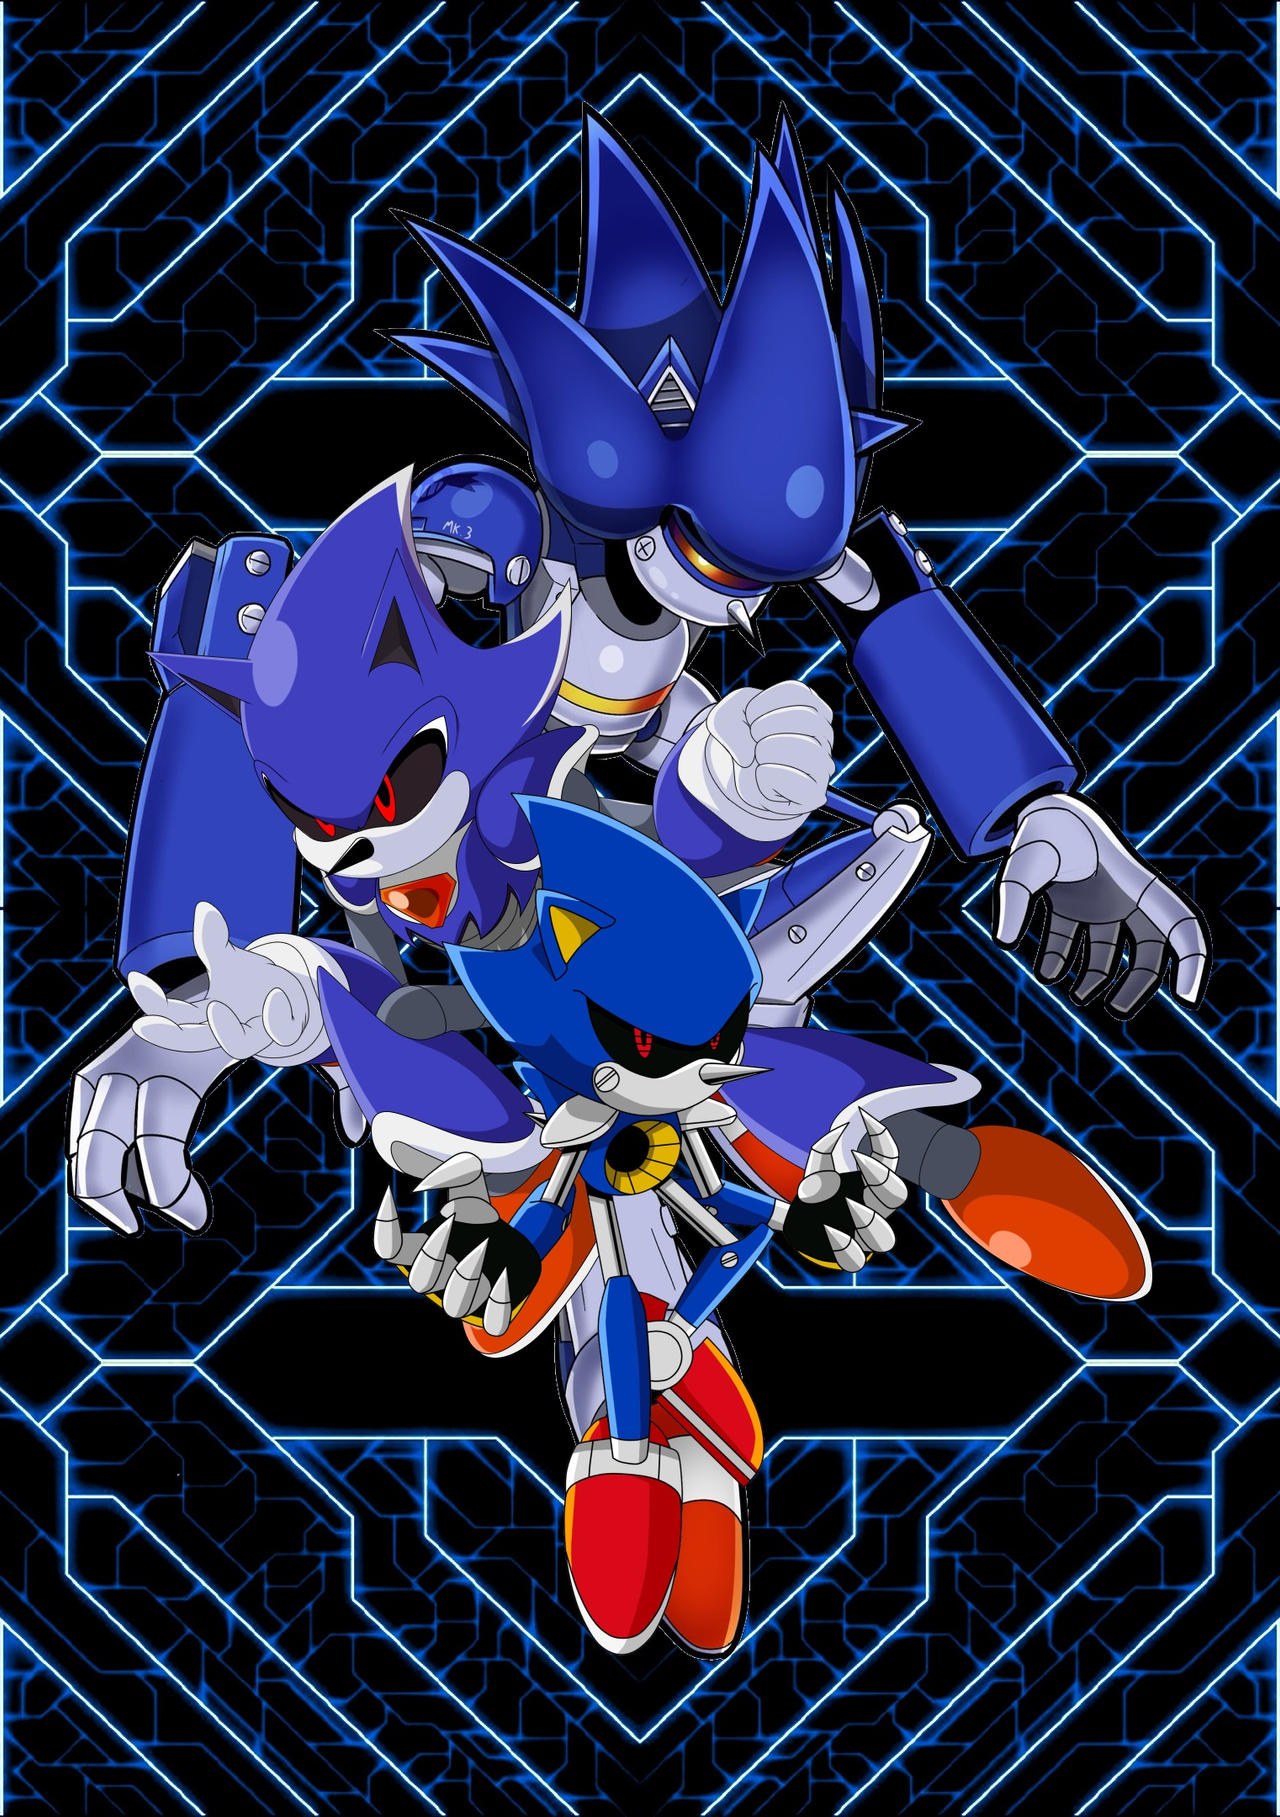 metal sonic and mecha sonic (sonic and 2 more) drawn by 9474s0ul